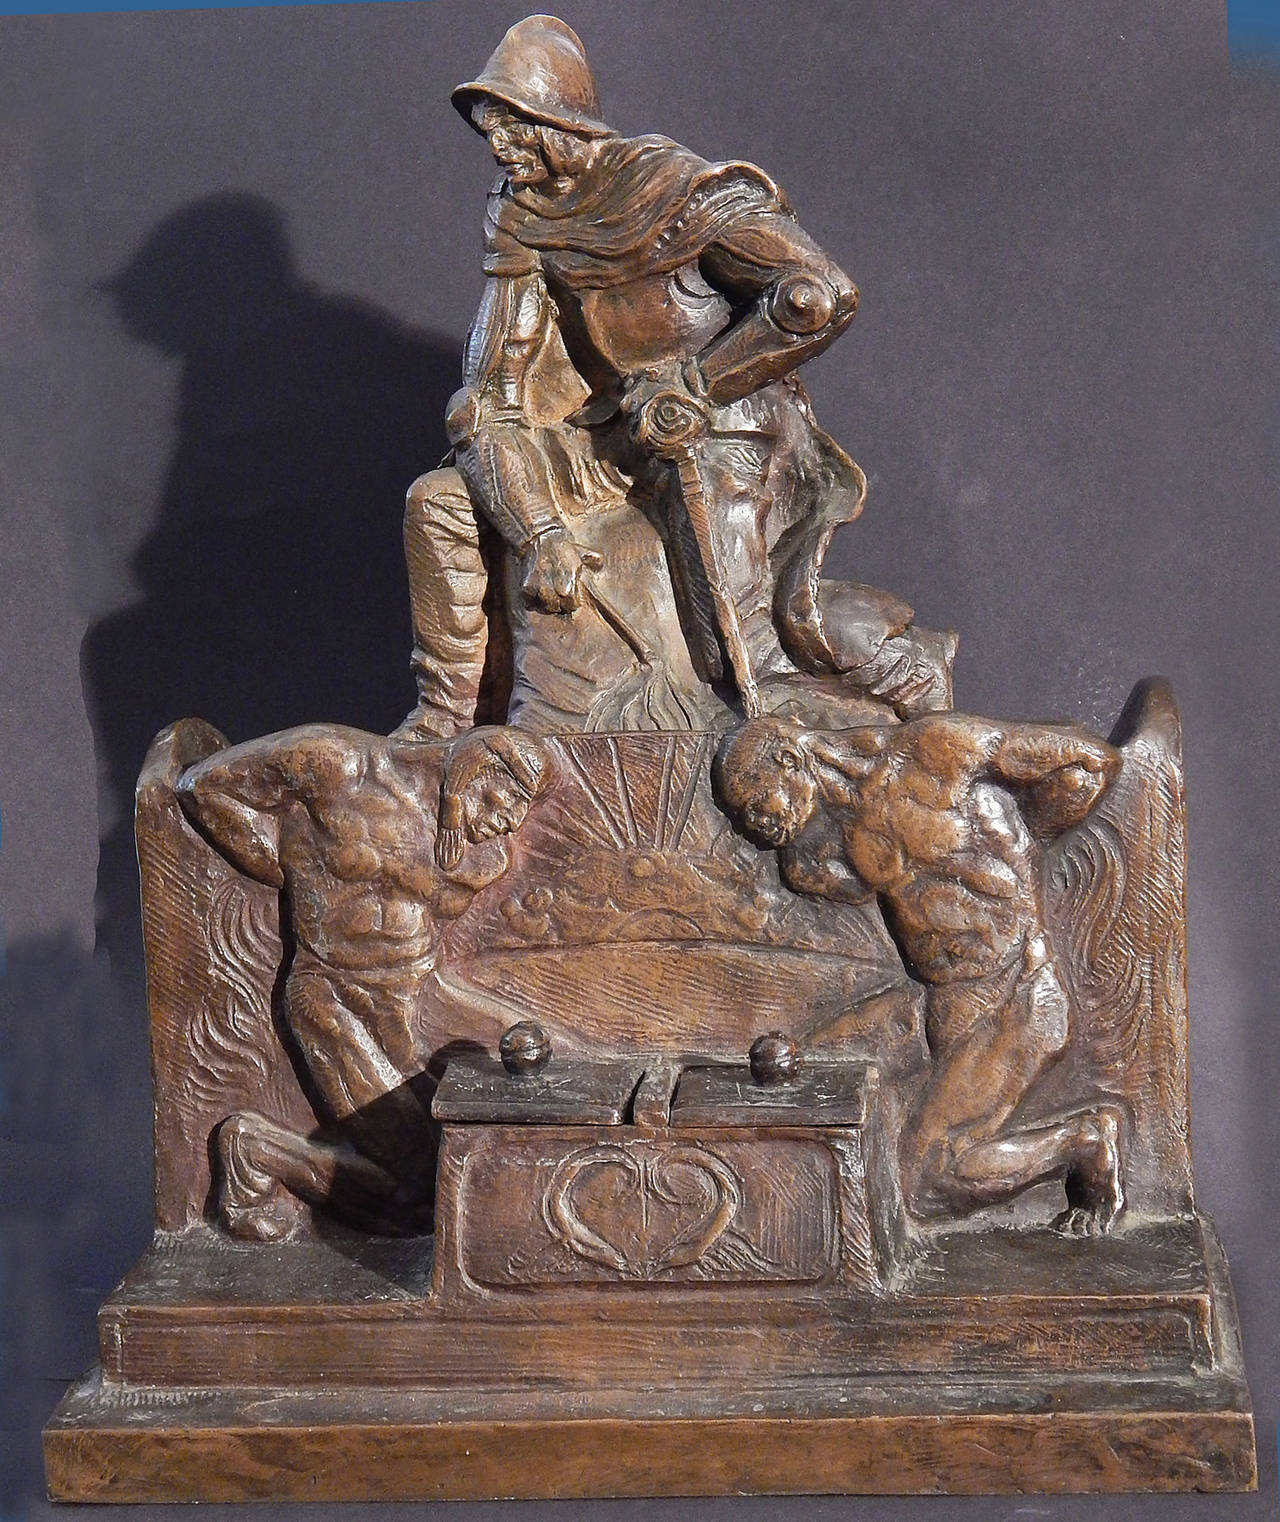 More of an indictment of the Spanish conquest of North America than a celebration, this quite extraordinary, large bronze inkwell depicts a Conquistador, holding sword and whip, seated above two bowed nude figures, clearly depicting Native and